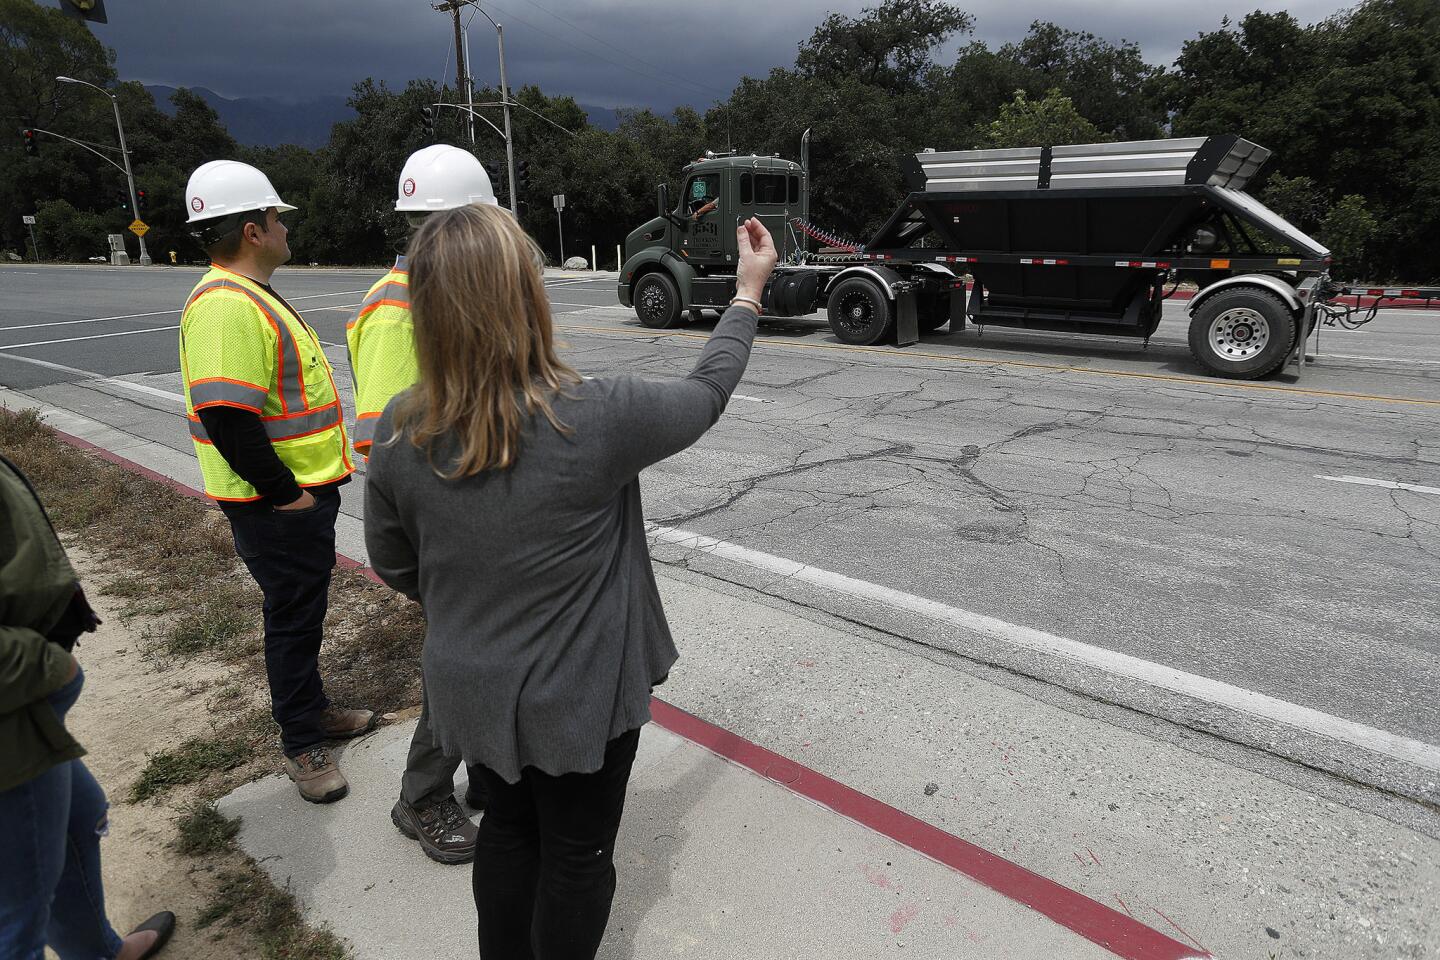 Environmentalist Liz Krider points out a debris hauler preparing to turn from Berkshire Place from Oak Grove Drive in La Canada Flintridgeon the first day of debris hauling from Devil's Gate Dam on Tuesday, May 21, 2019. The four-year project concerns local residents and leadership with the La Canada Unified School District due to the traffic of hundreds of trucks hauling debris traveling on Oak Grove Drive turning on Berkshire Place.